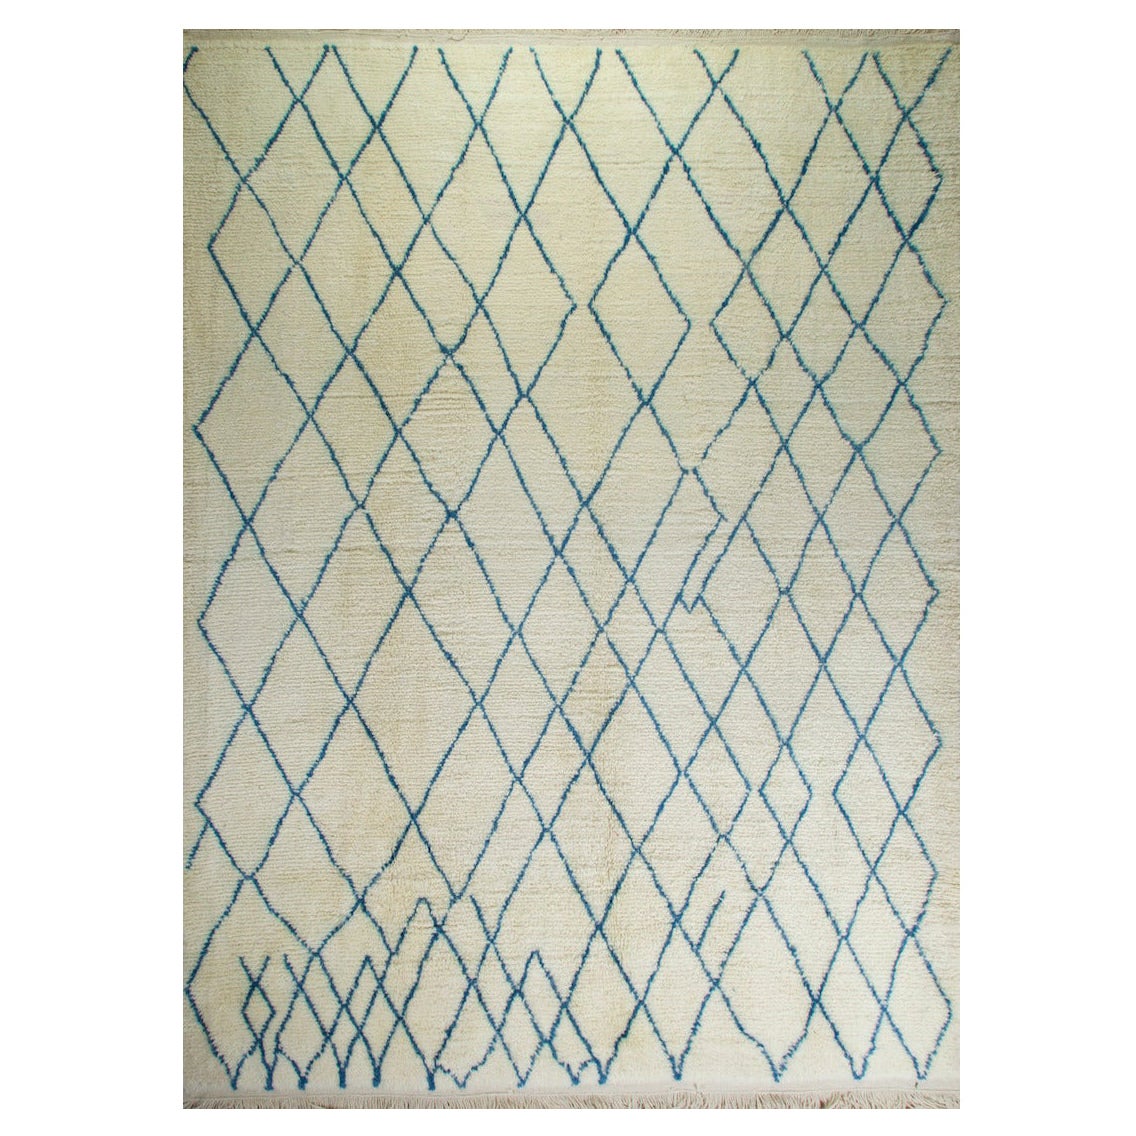 9x12 Ft Moroccan Rug. 100% Wool. Ivory & Blue Colors, Custom Options Available